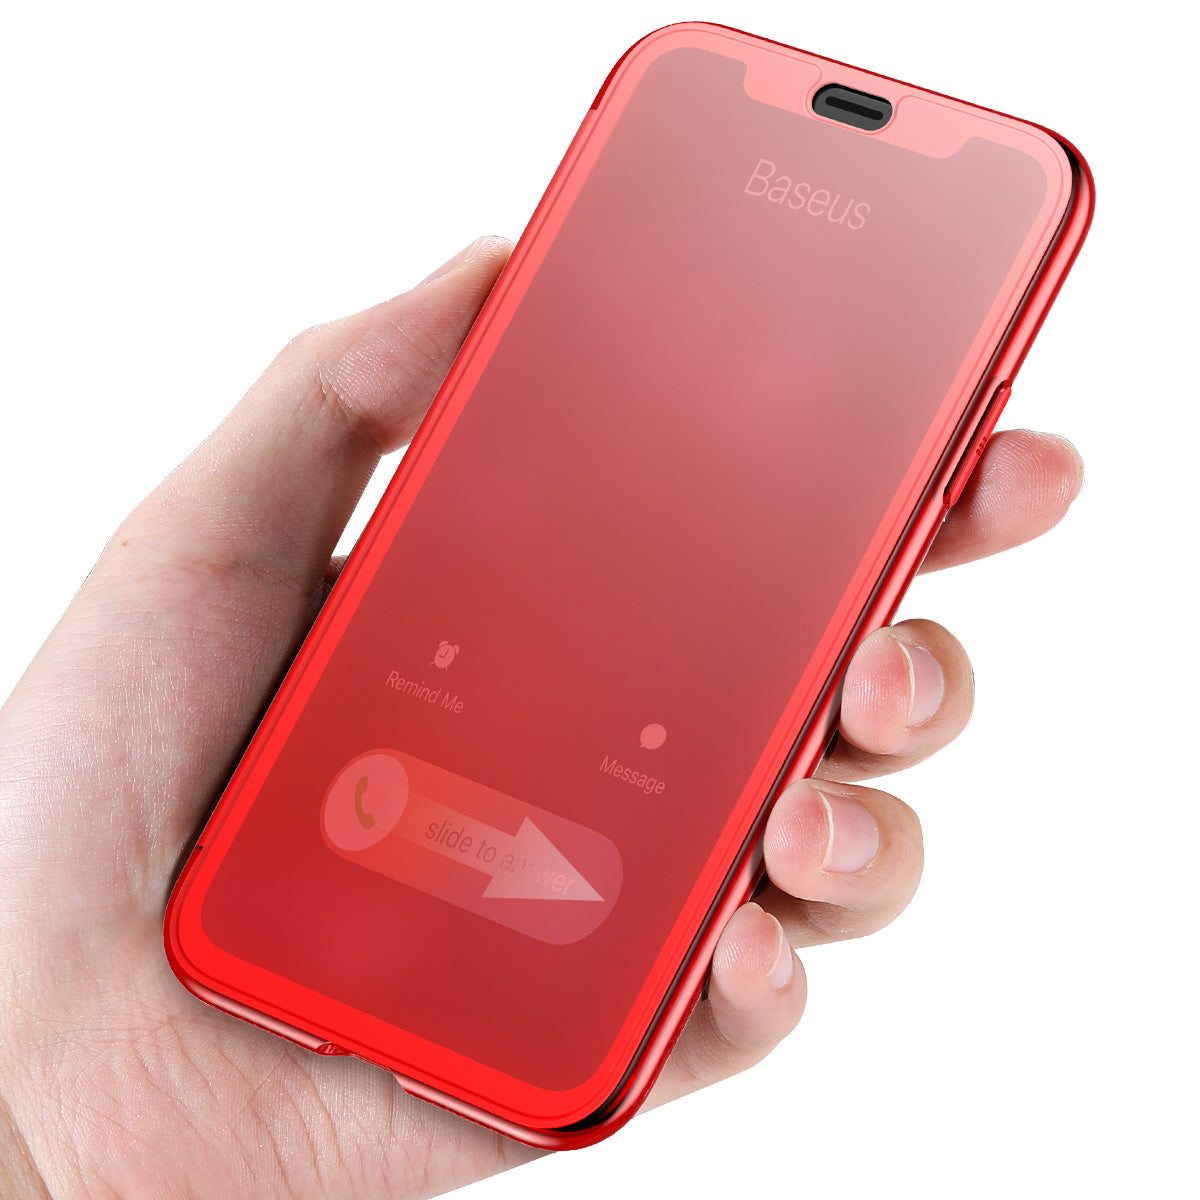 iPhone-X-Baseus-Touchable-Case-Red-Hand_RZL0Y3ASFQ11.jpg